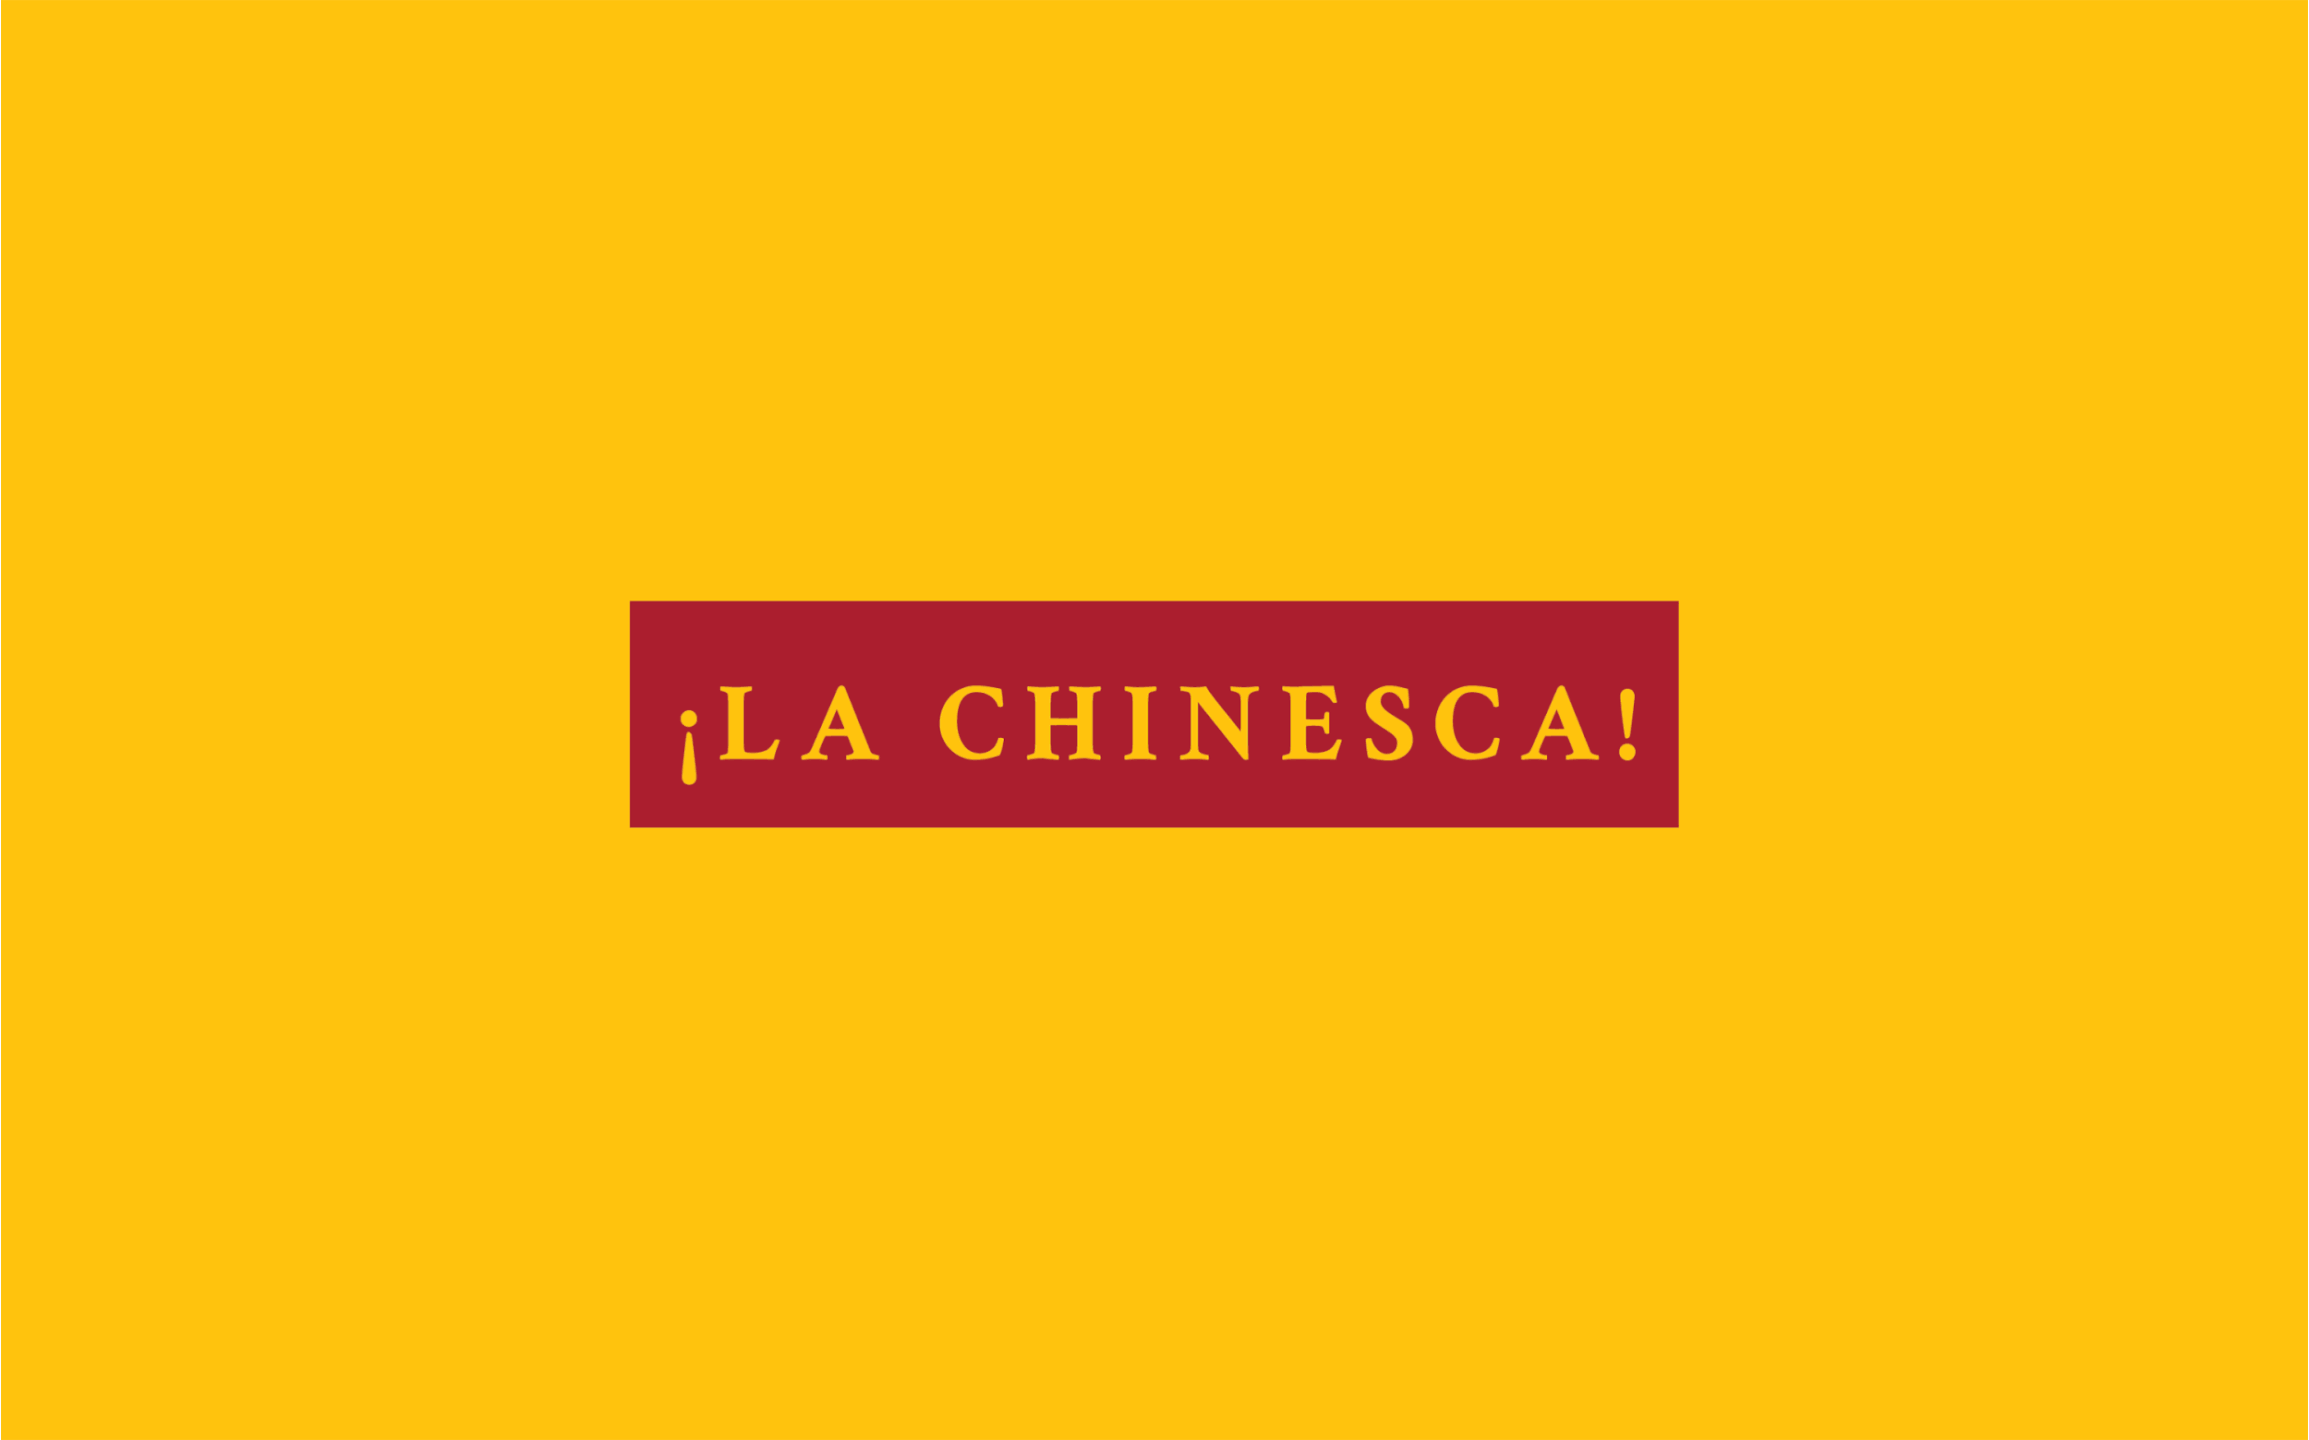 La Chinesca's fun and witty copy in brand typography and colors